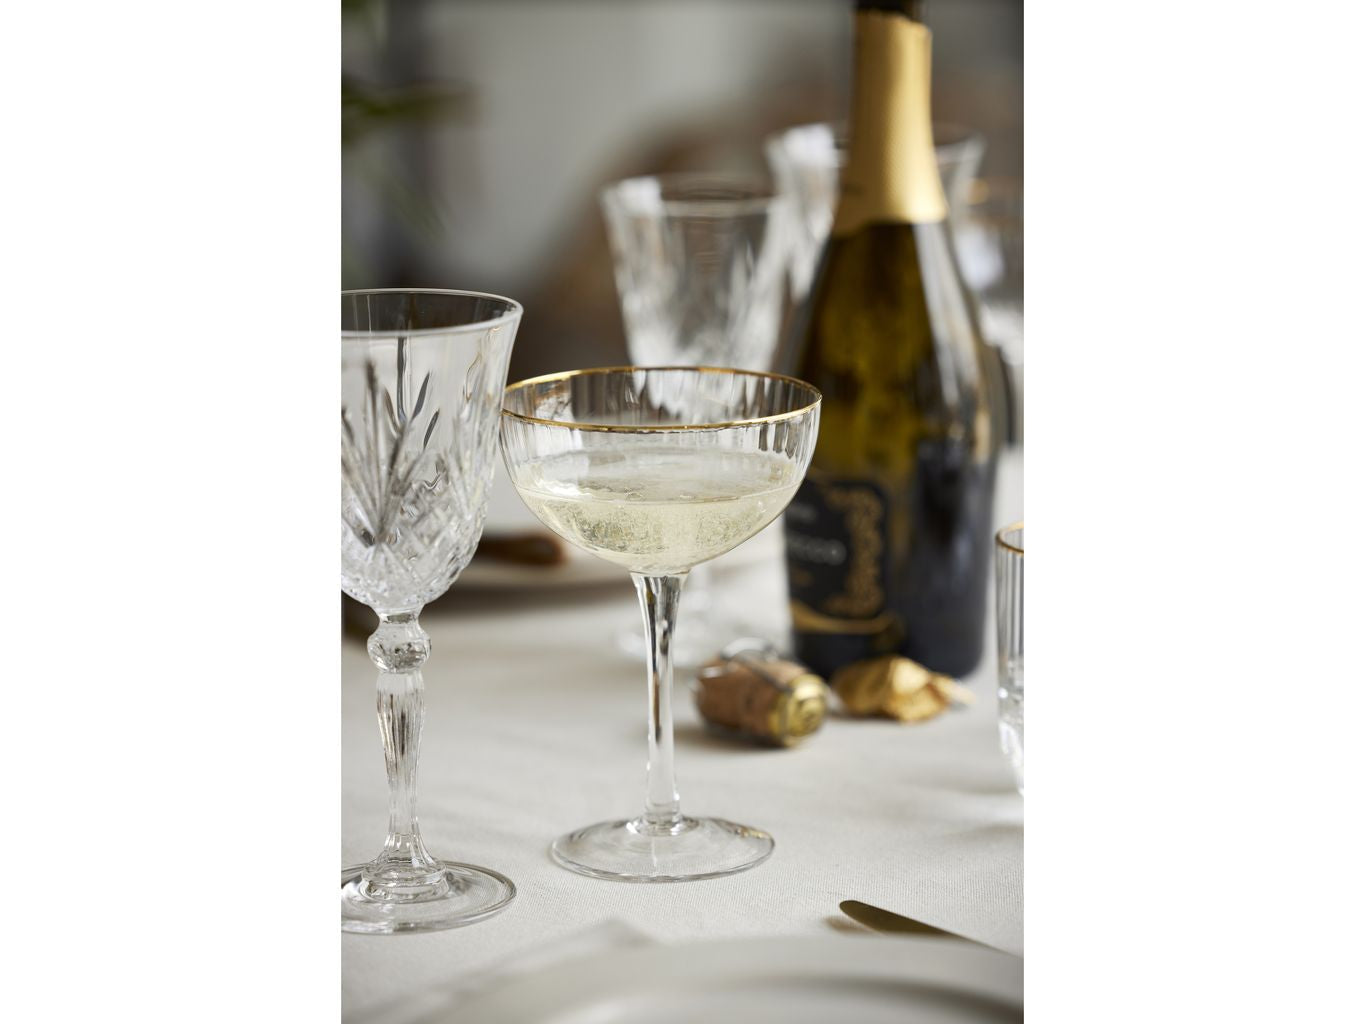 Lyngby Glas Palermo Gold Cocktail Glass 31,5 Cl, 4 st.